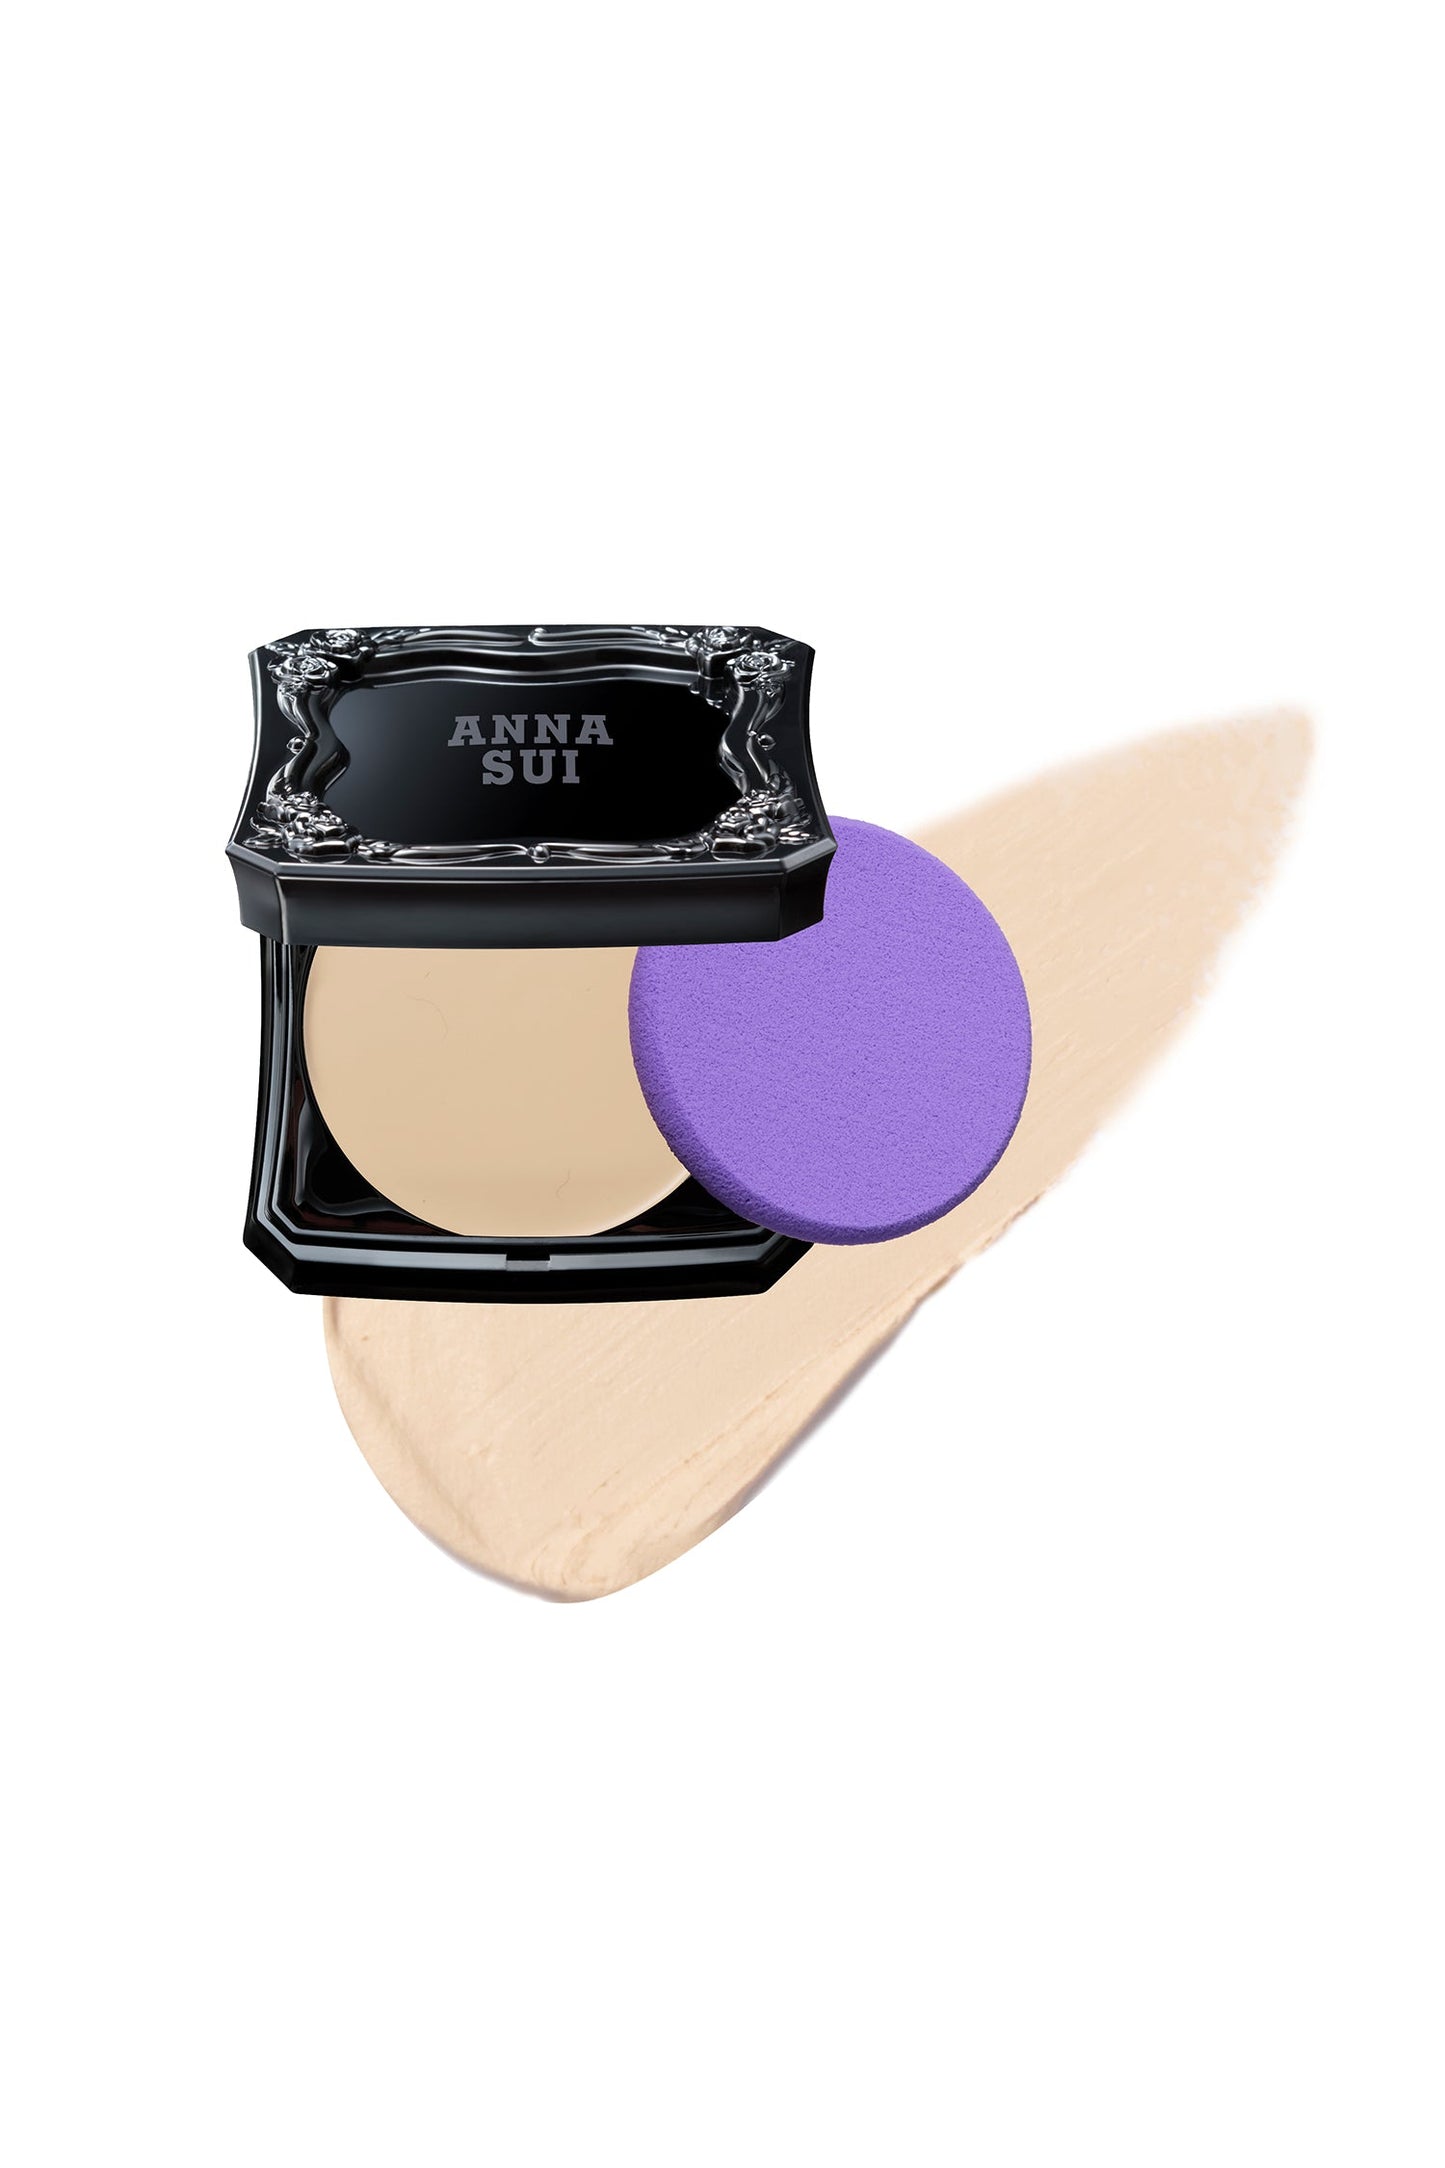 FAIR foundation is in a black container with raised rose pattern, label with powders &violet pad